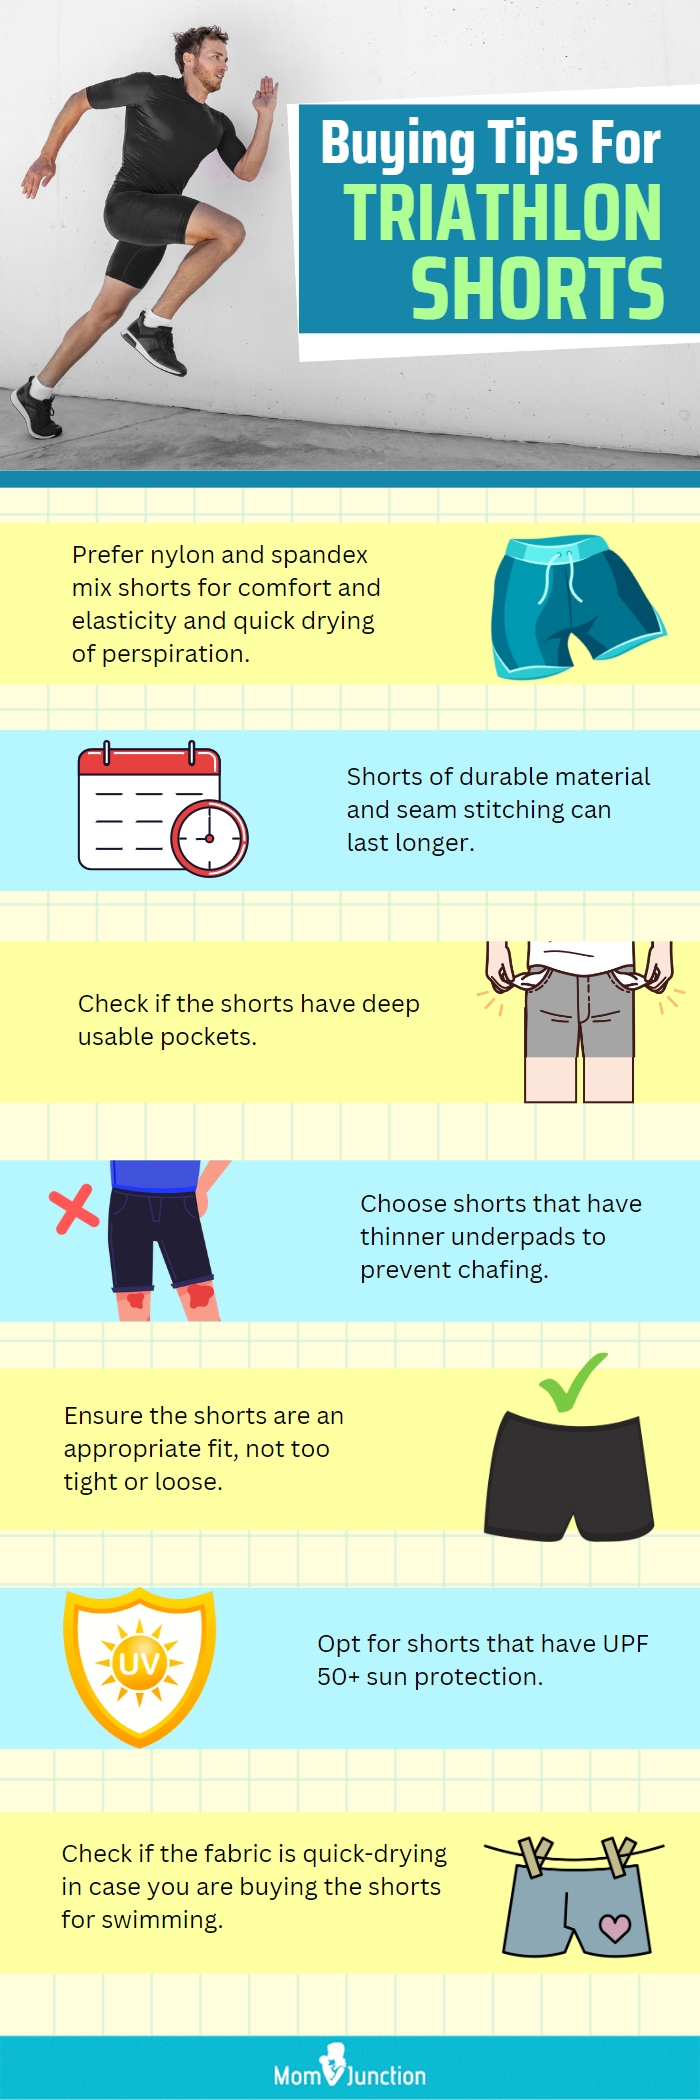 Buying Tips For Triathlon Shorts (infographic)